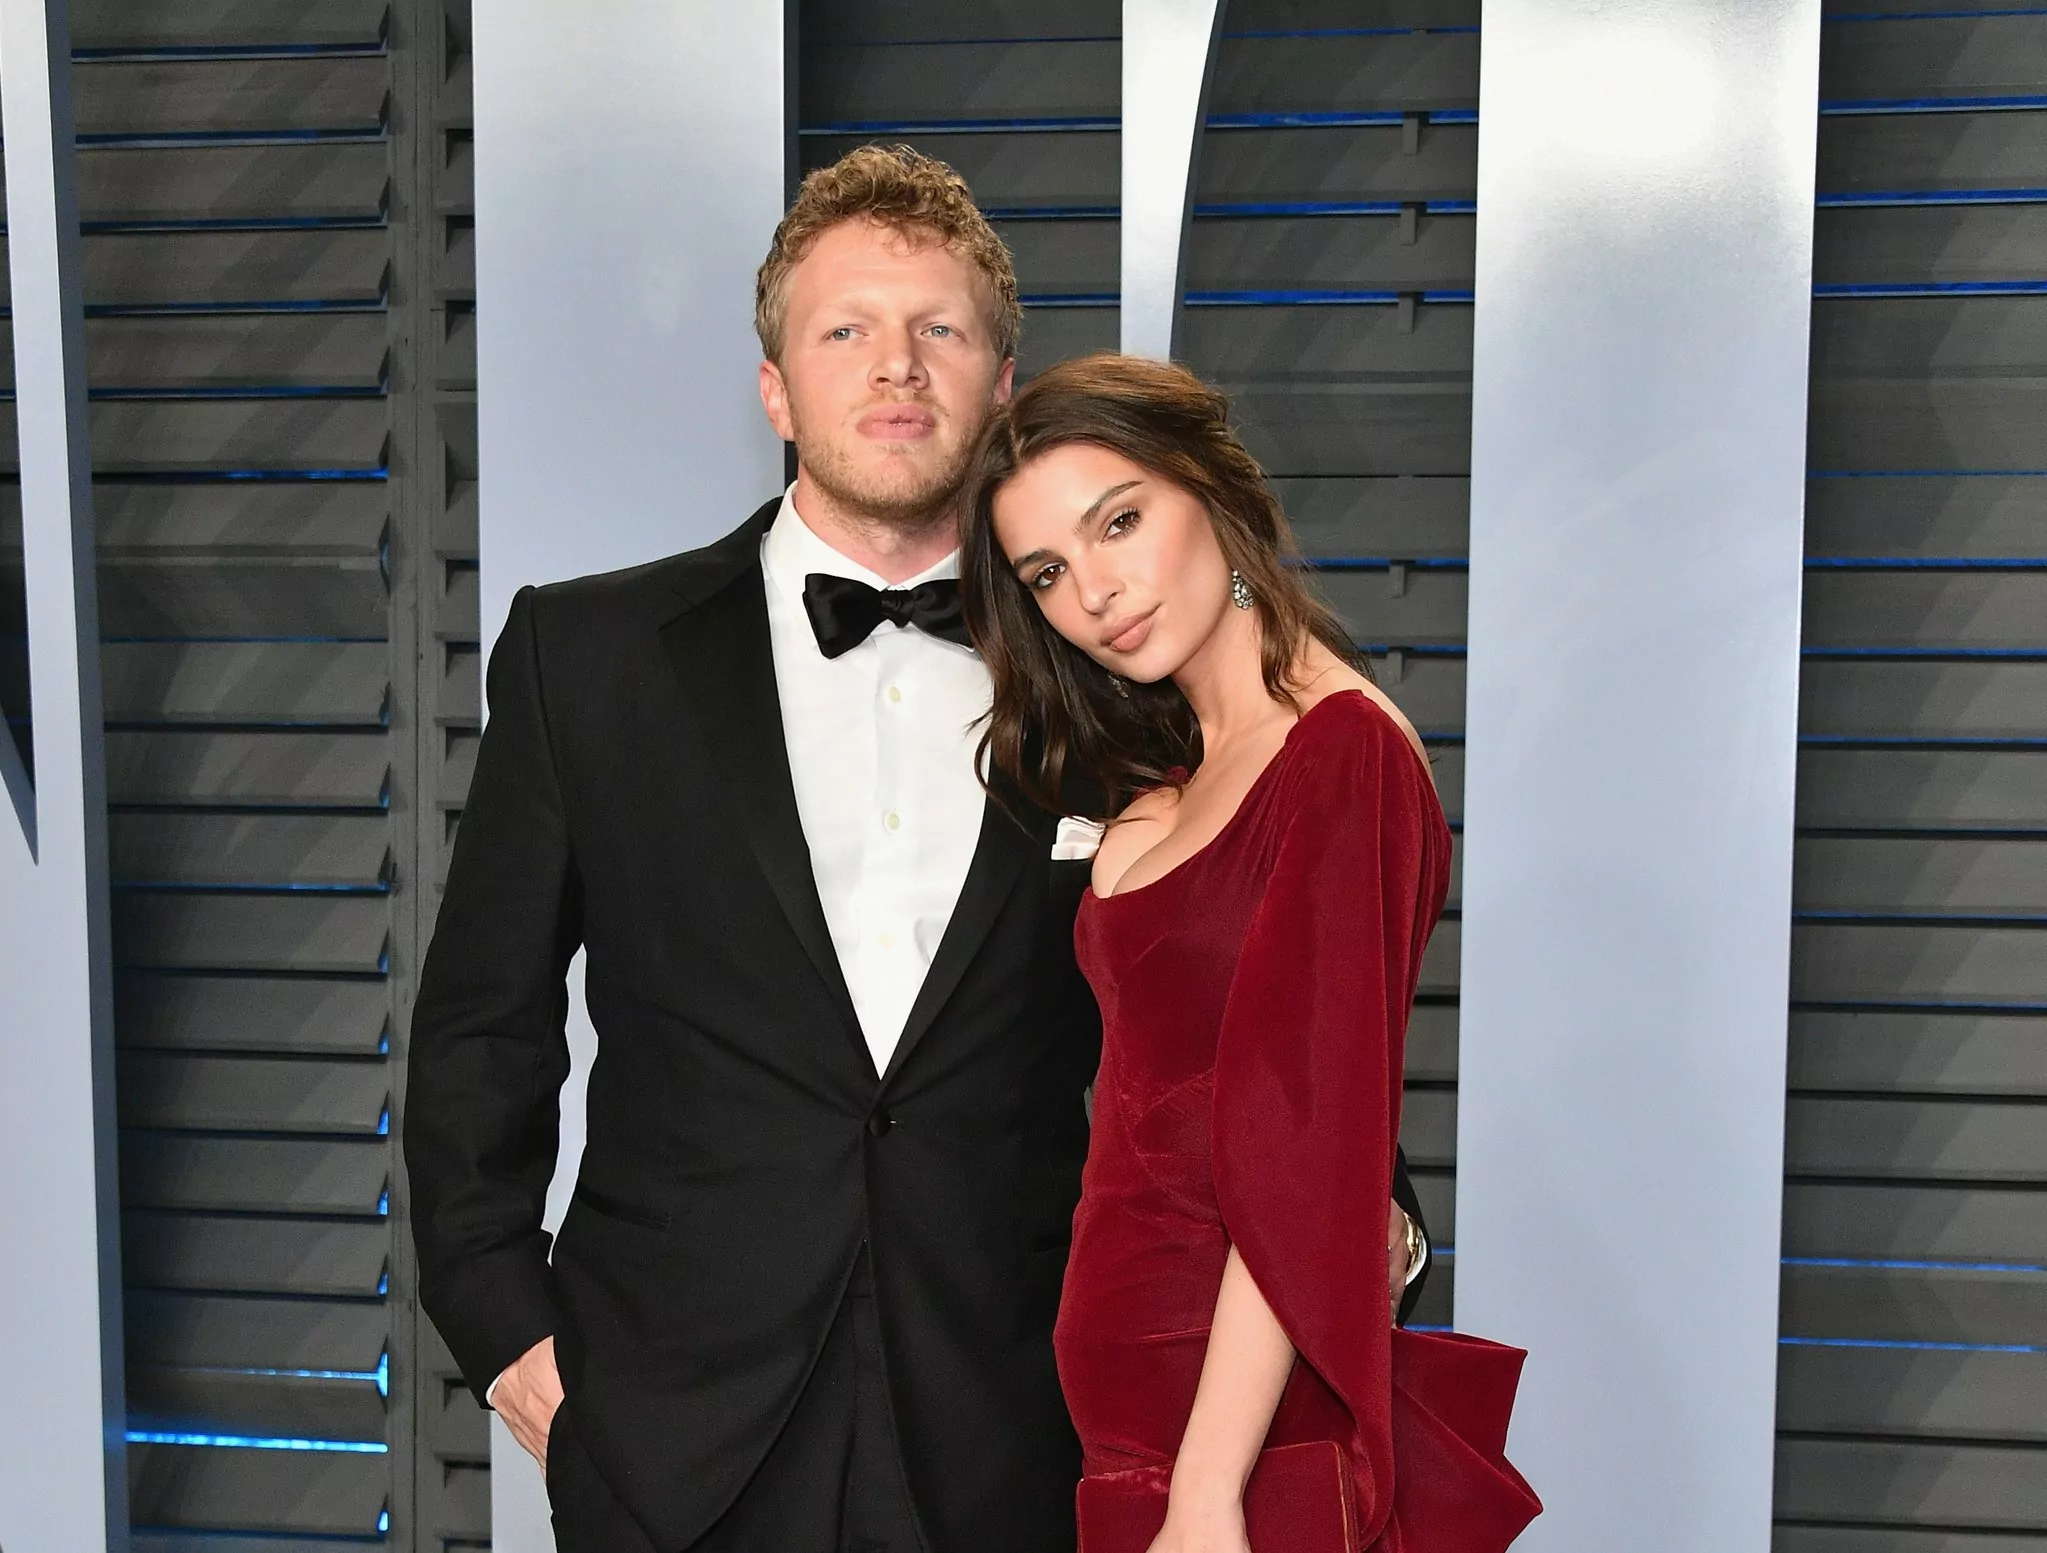 BEVERLY HILLS, CA - MARCH 04: Sebastian Bear-McClard (L) and Belvedere Ambassador Emily Ratajkowski attend the 2018 Vanity Fair Oscar Party hosted by Radhika Jones at Wallis Annenberg Center for the Performing Arts on March 4, 2018 in Beverly Hills, California. (Photo by Dia Dipasupil/Getty Images)